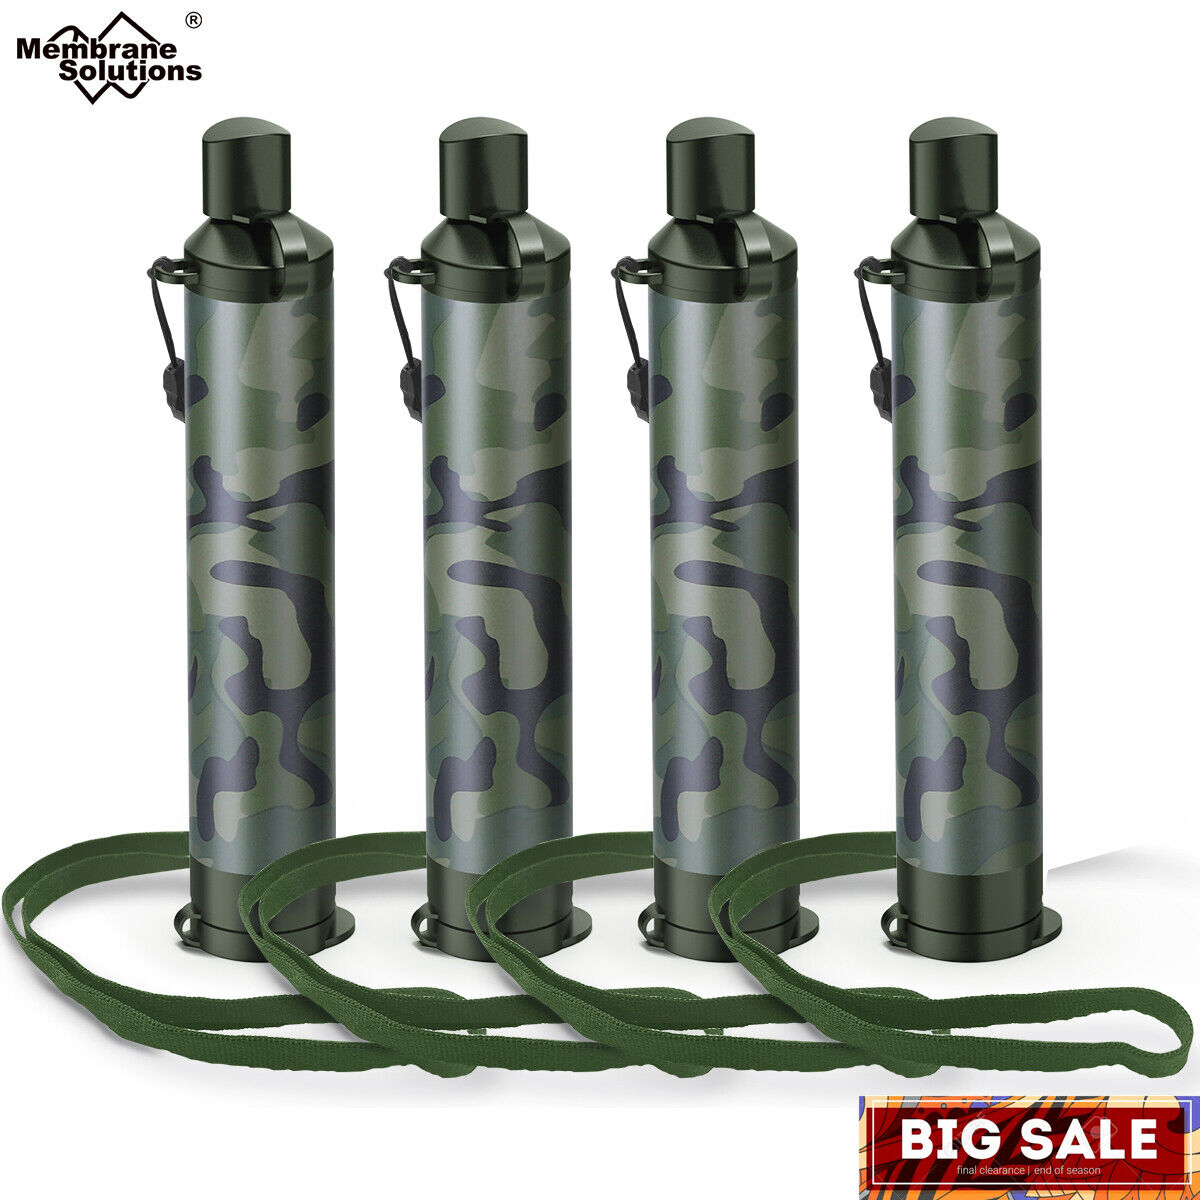 4Pcs Water Filter Straw Portable Water Filters F Camping,Hiking,Travel,Survival